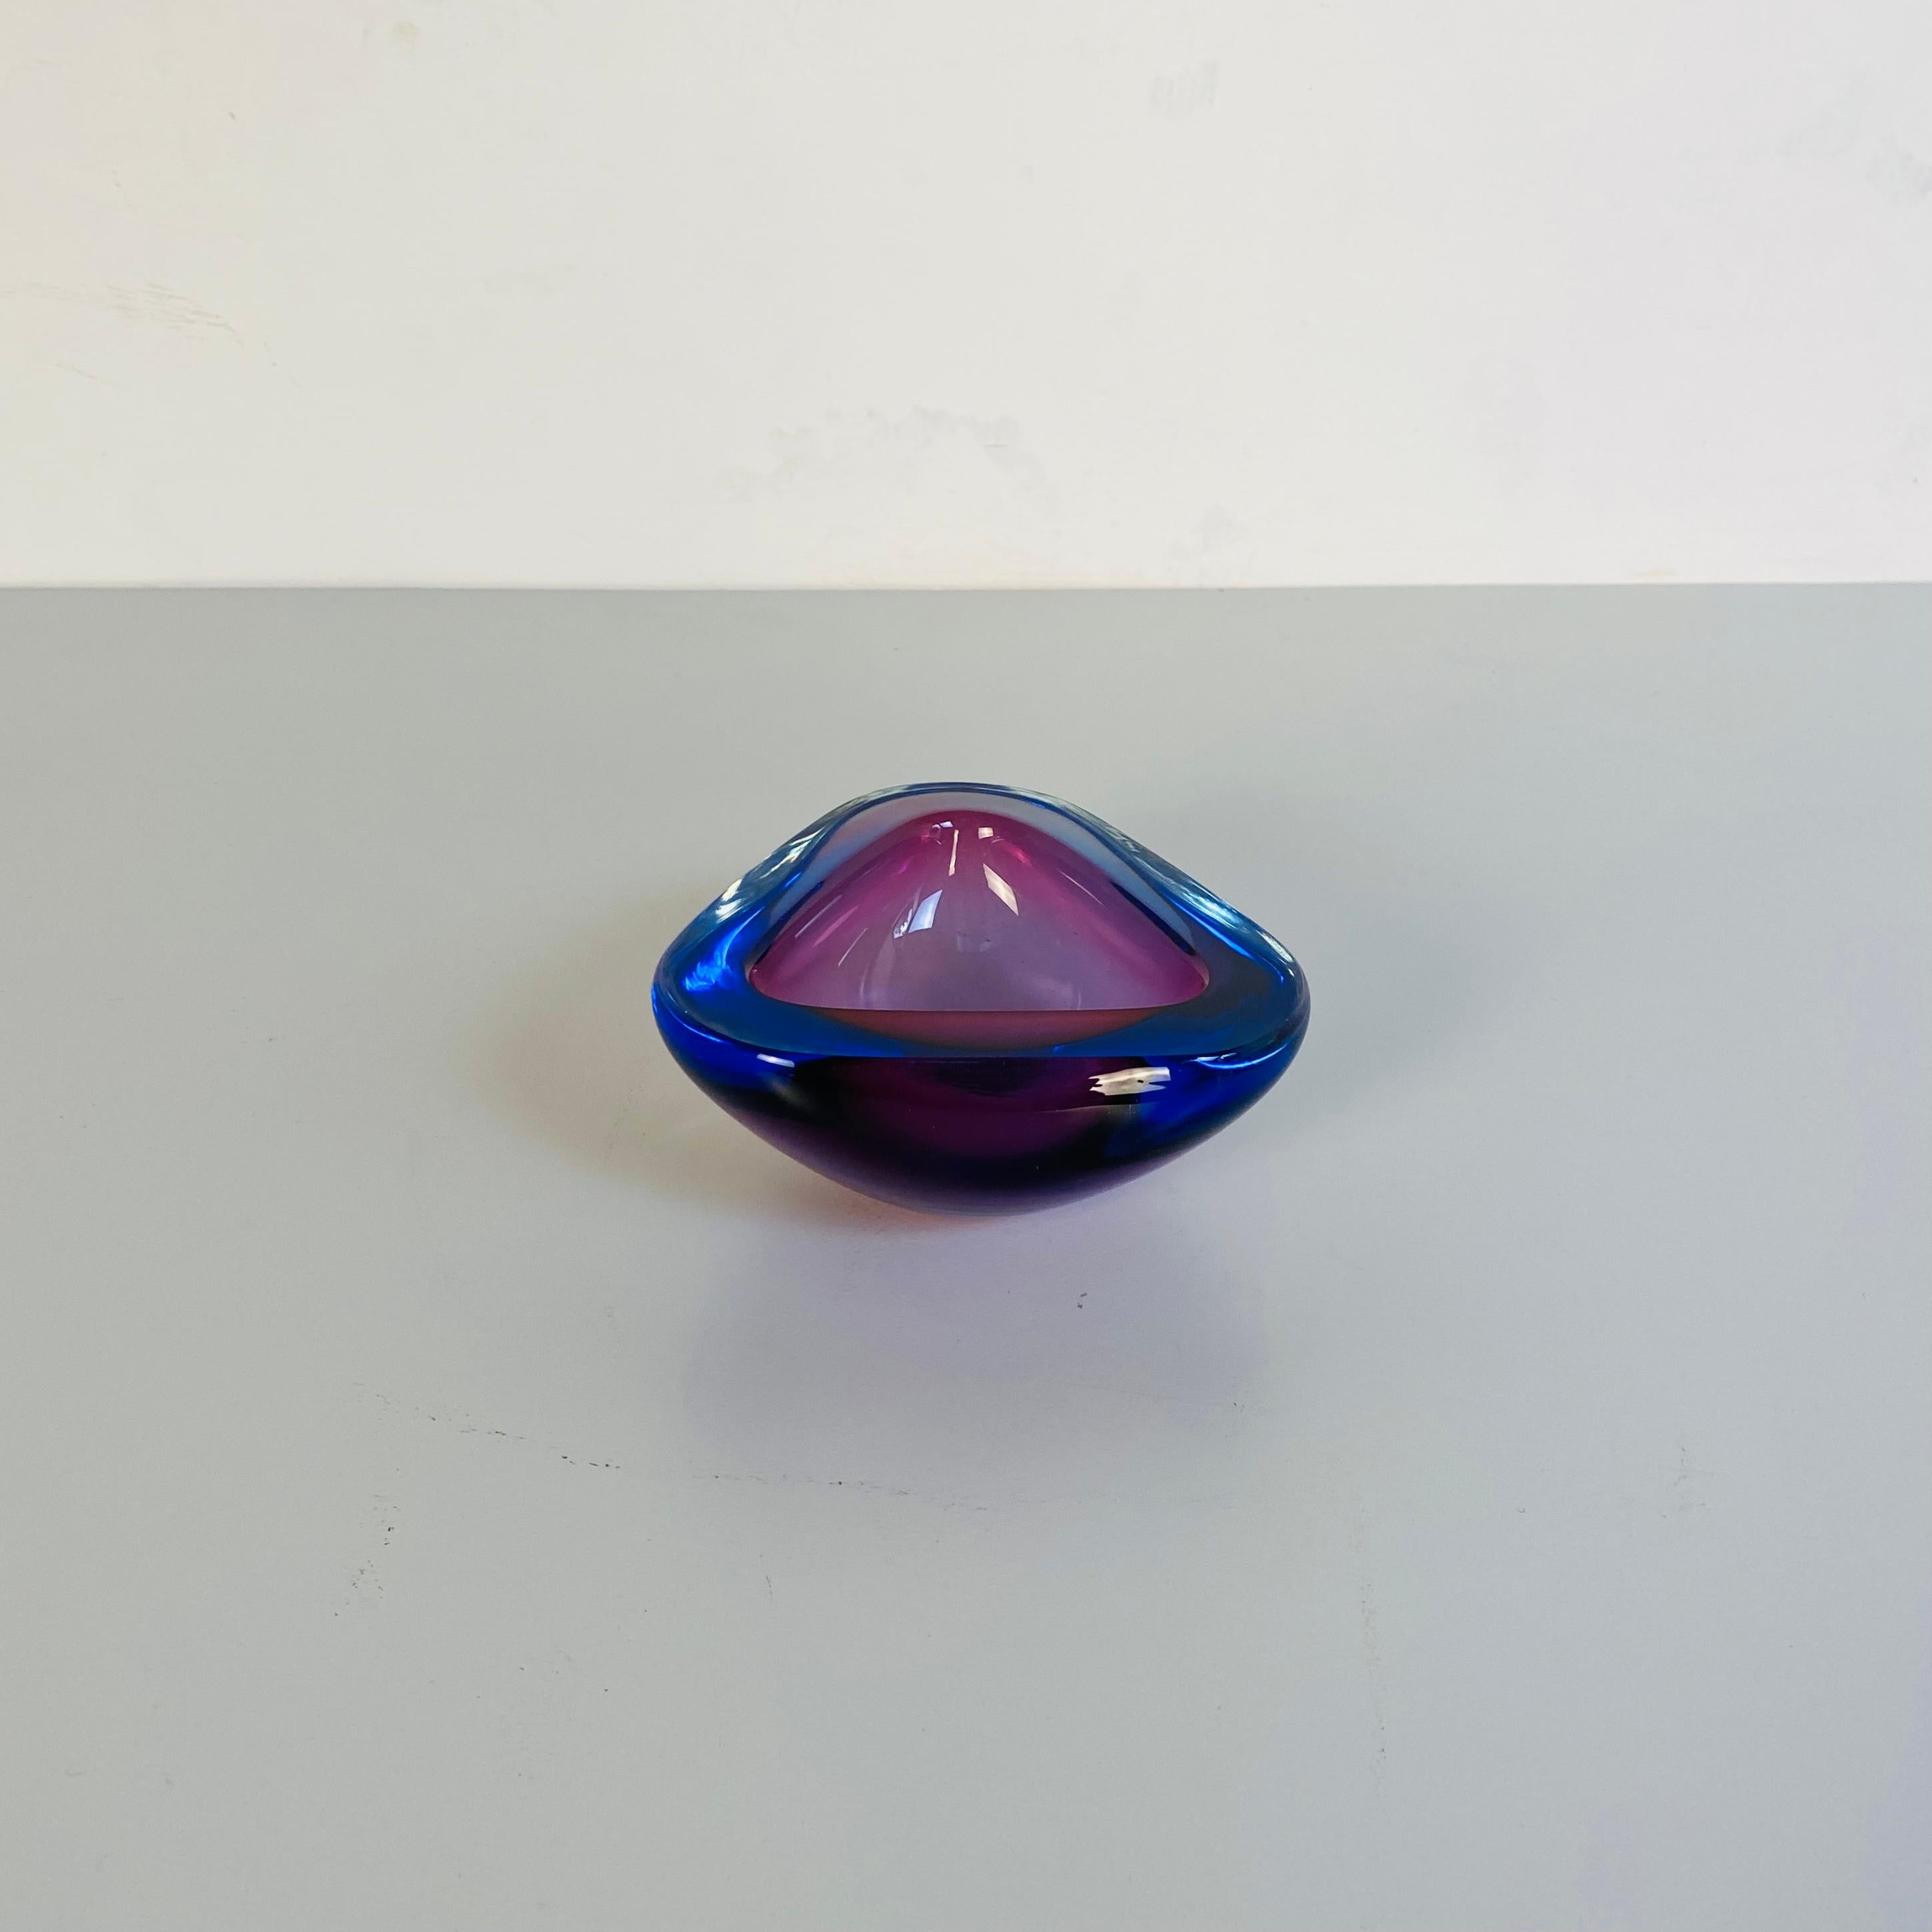 Italian Mid-Century Modern triangular purple Murano glass, Sommersi series, 1970s
Triangular shaped ashtray with rounded corners in Murano glass, purple with shades.

Very good condition

Measures 12 x 12 x 6 H cm.